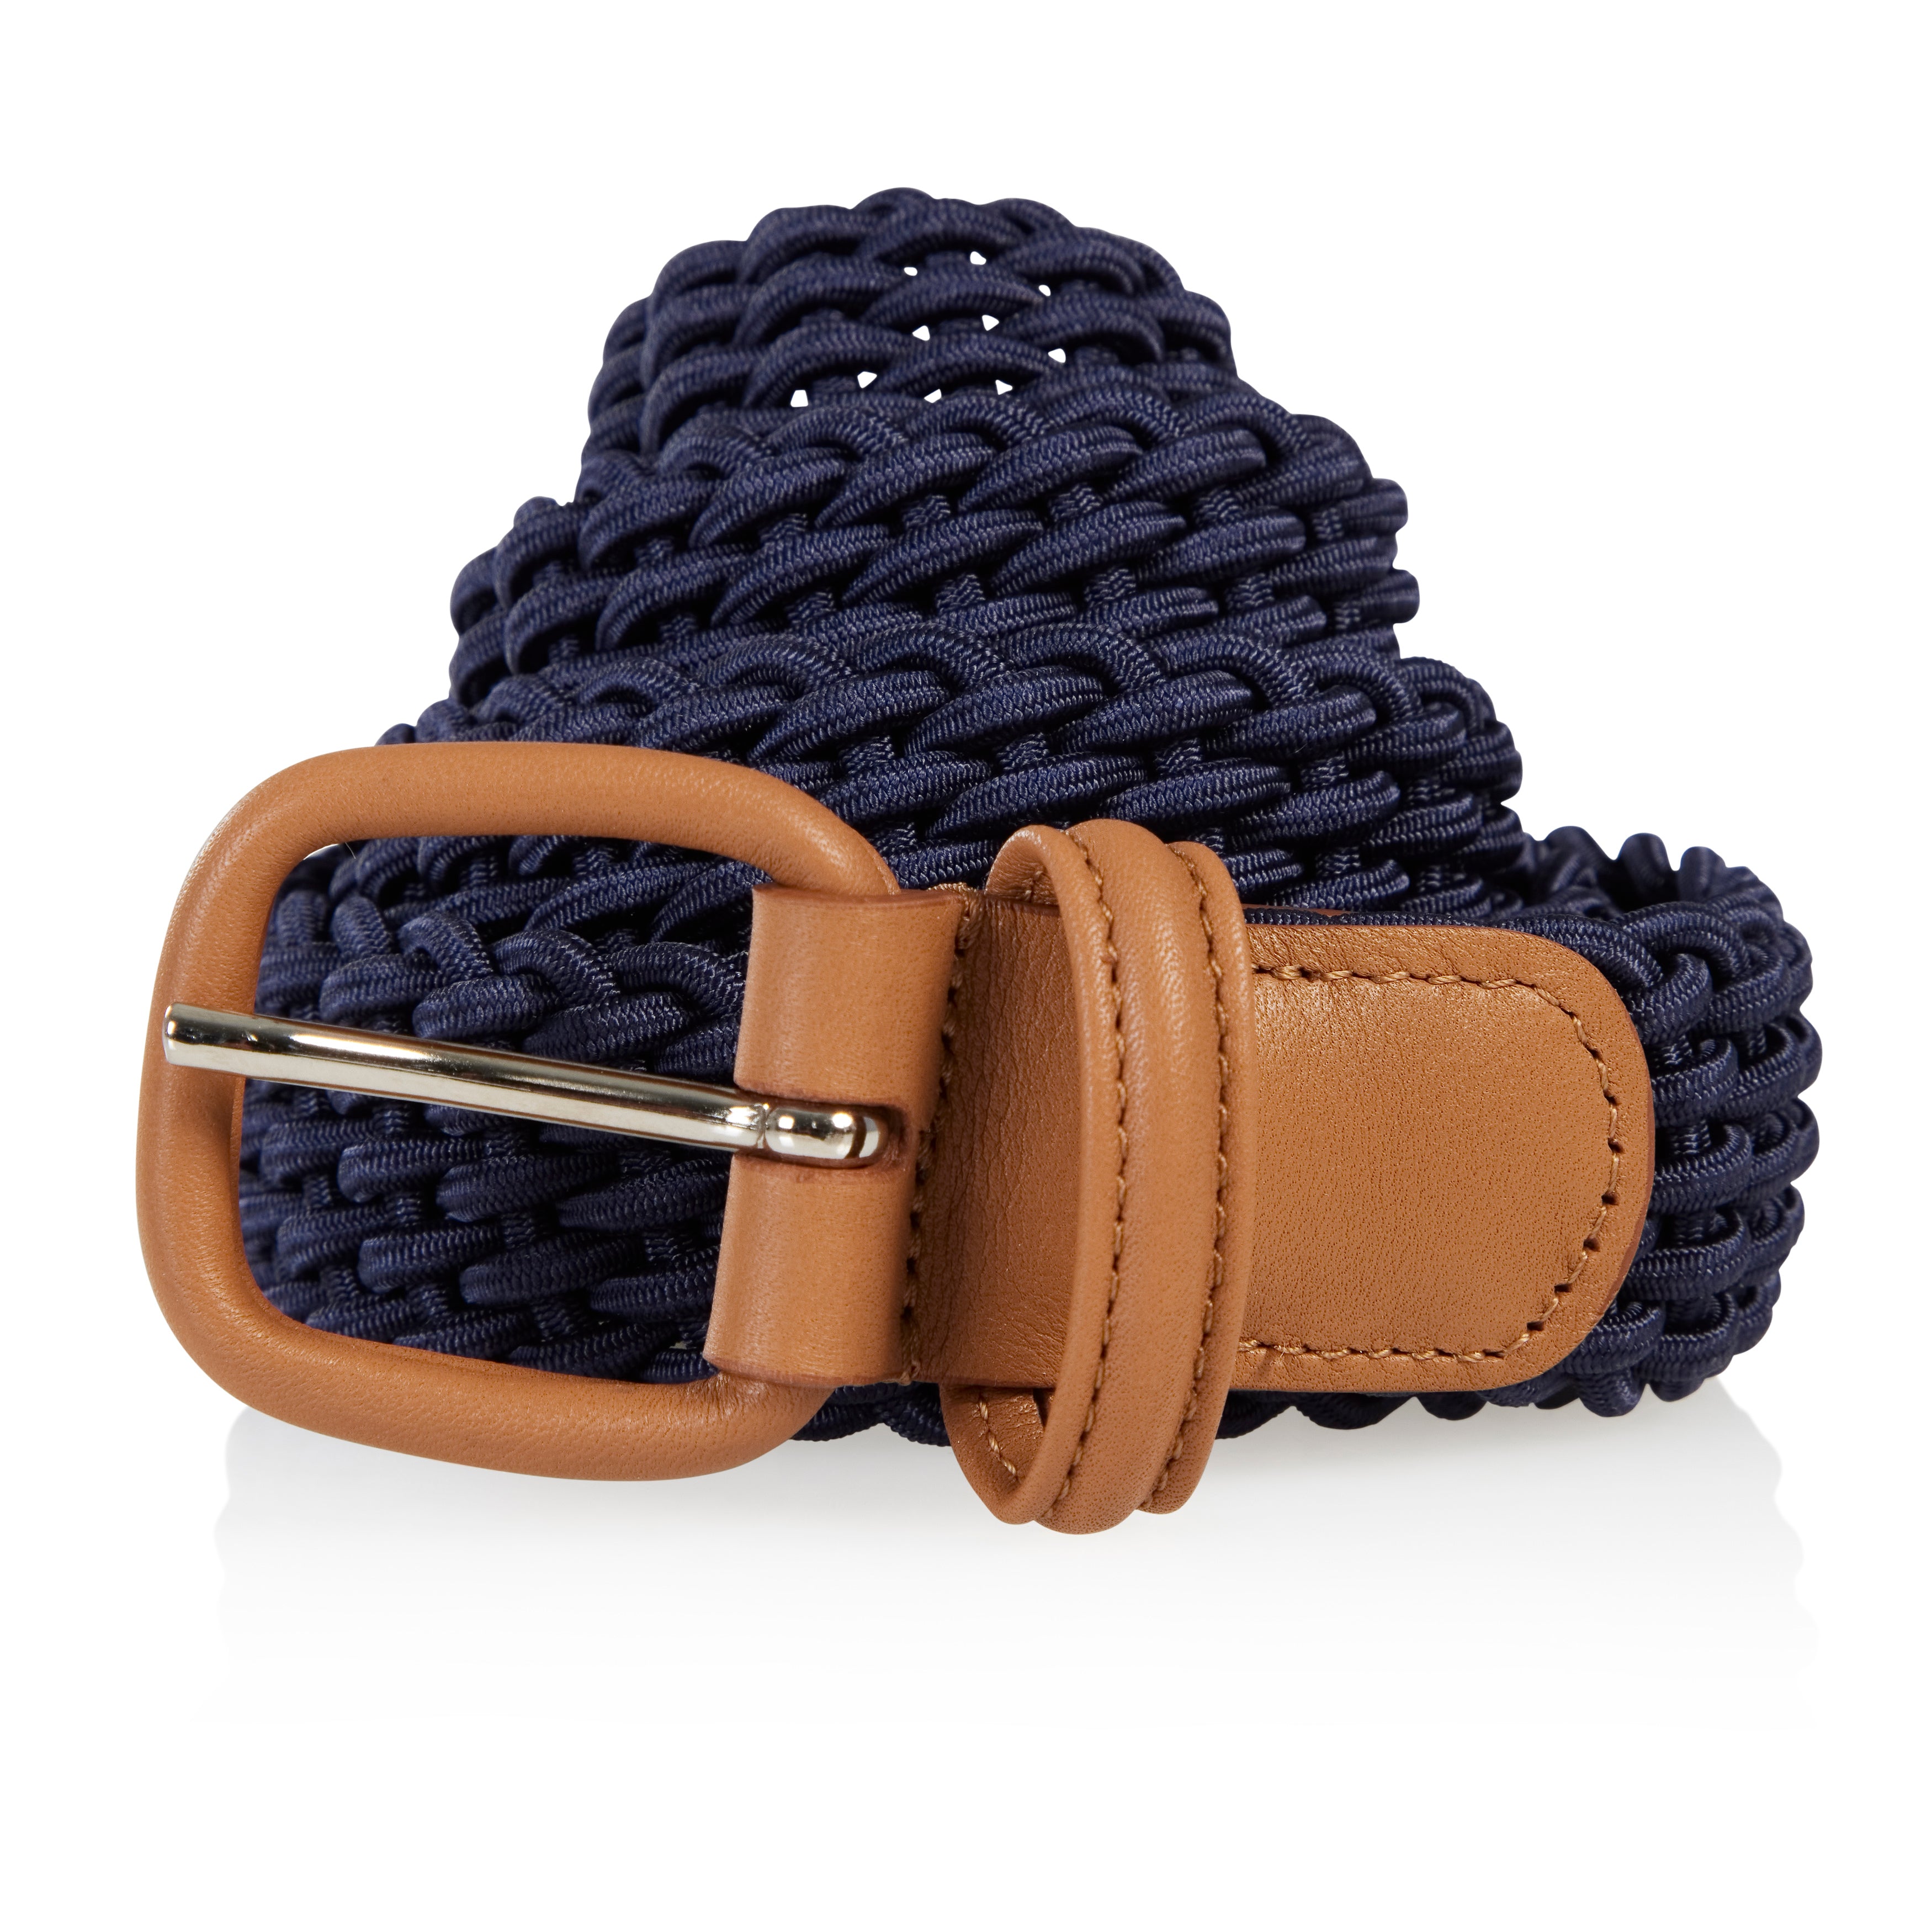 Belts - The Armoury